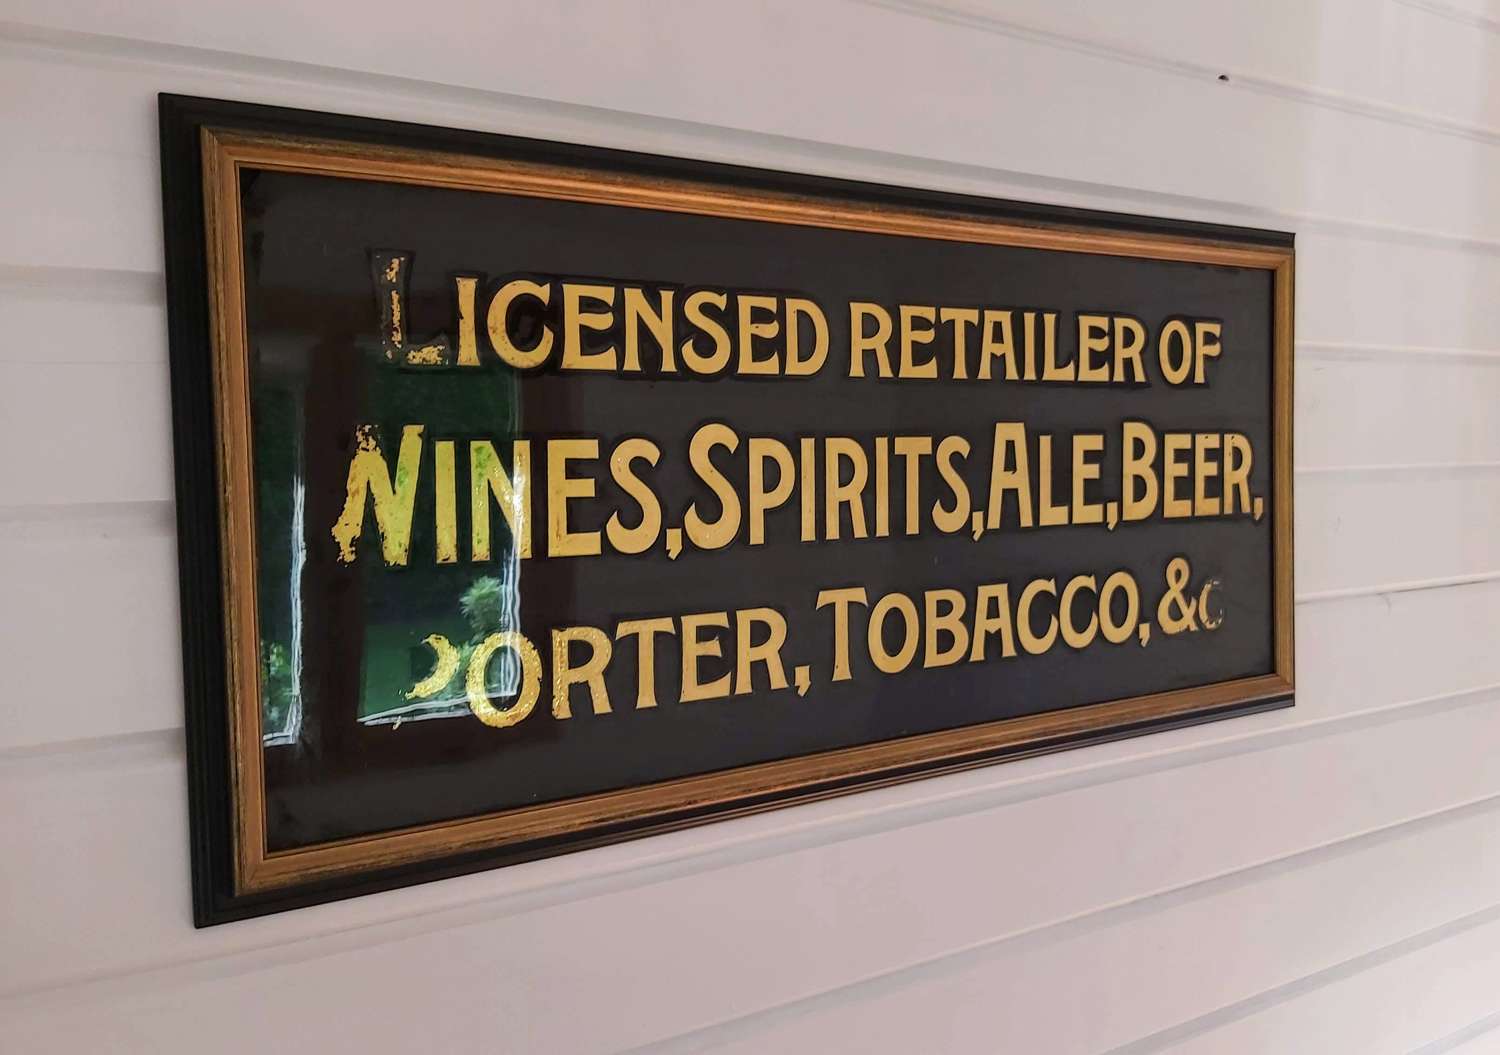 Late 19th century Public House glass sign